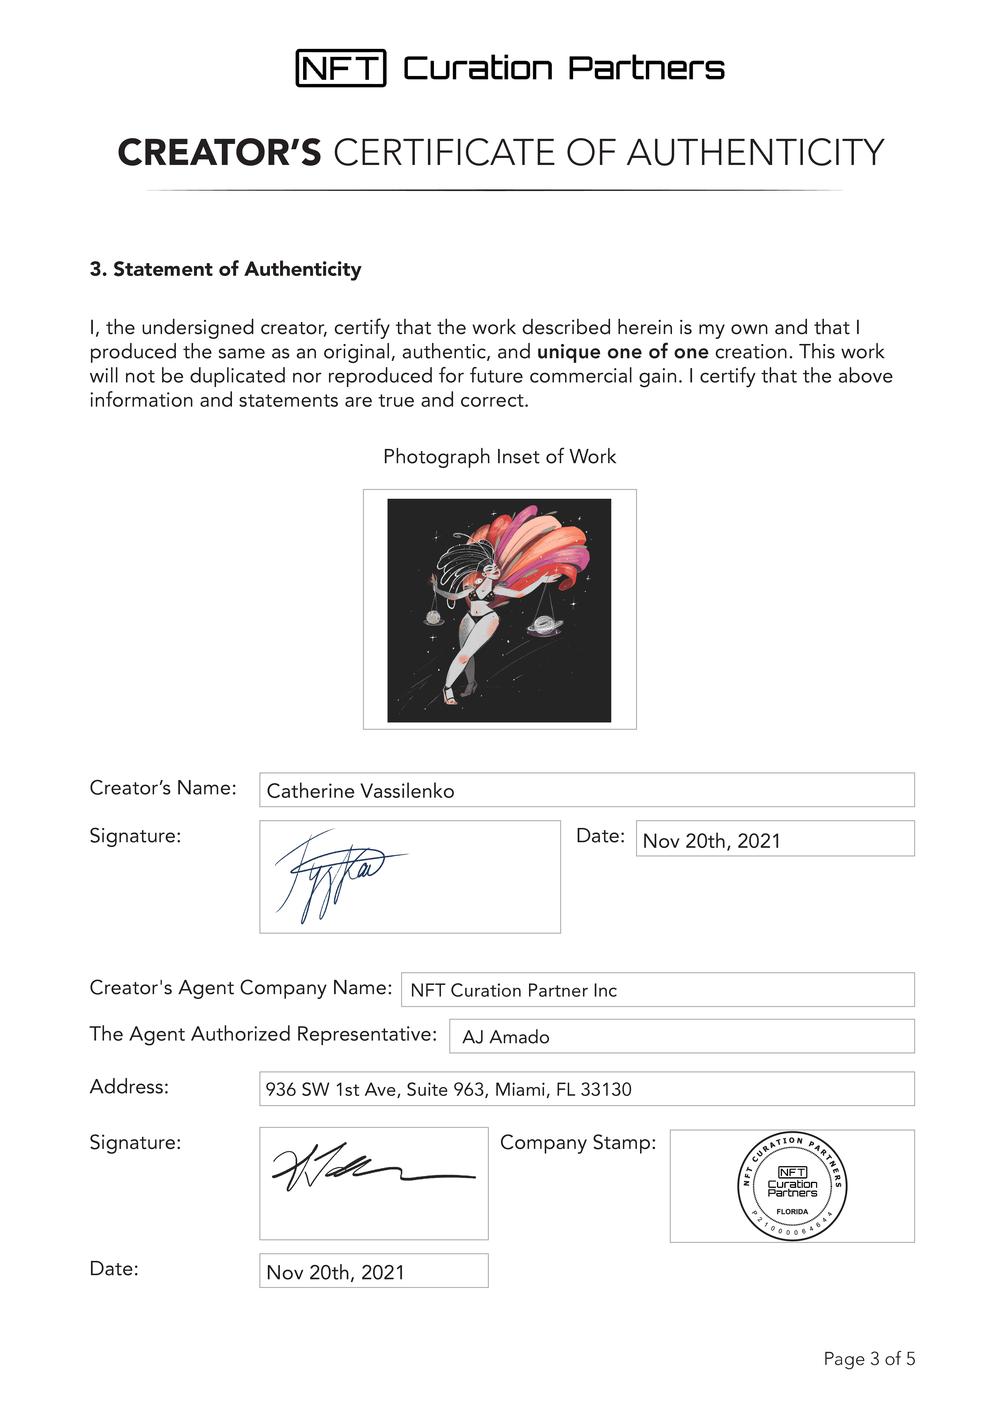 Certificate of Authenticity and Consignment - Libra